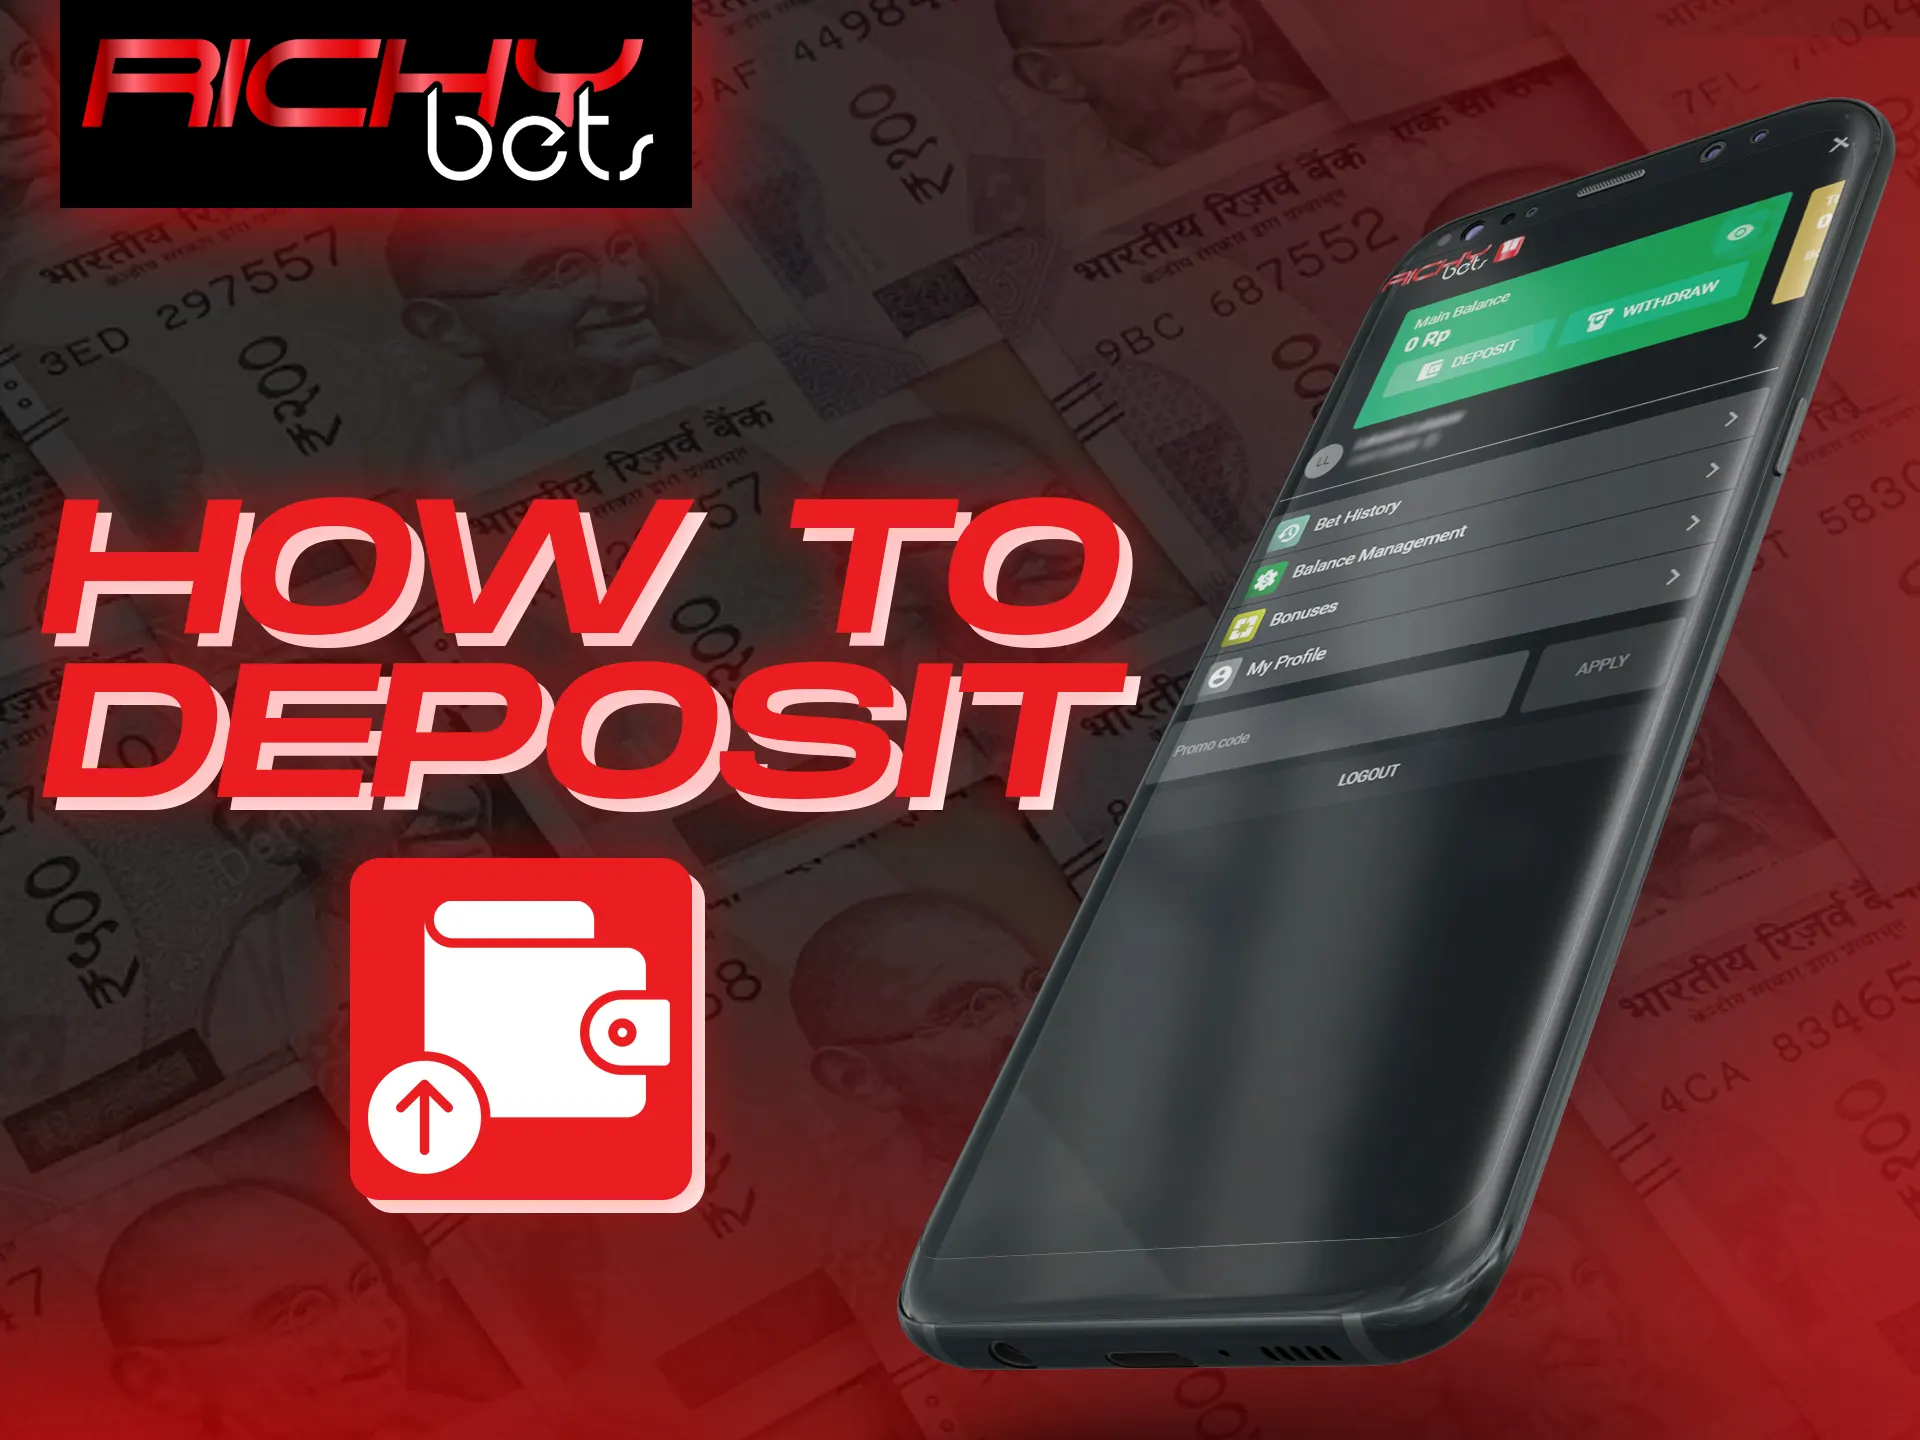 It's easy to make a deposit using the Richybets app.